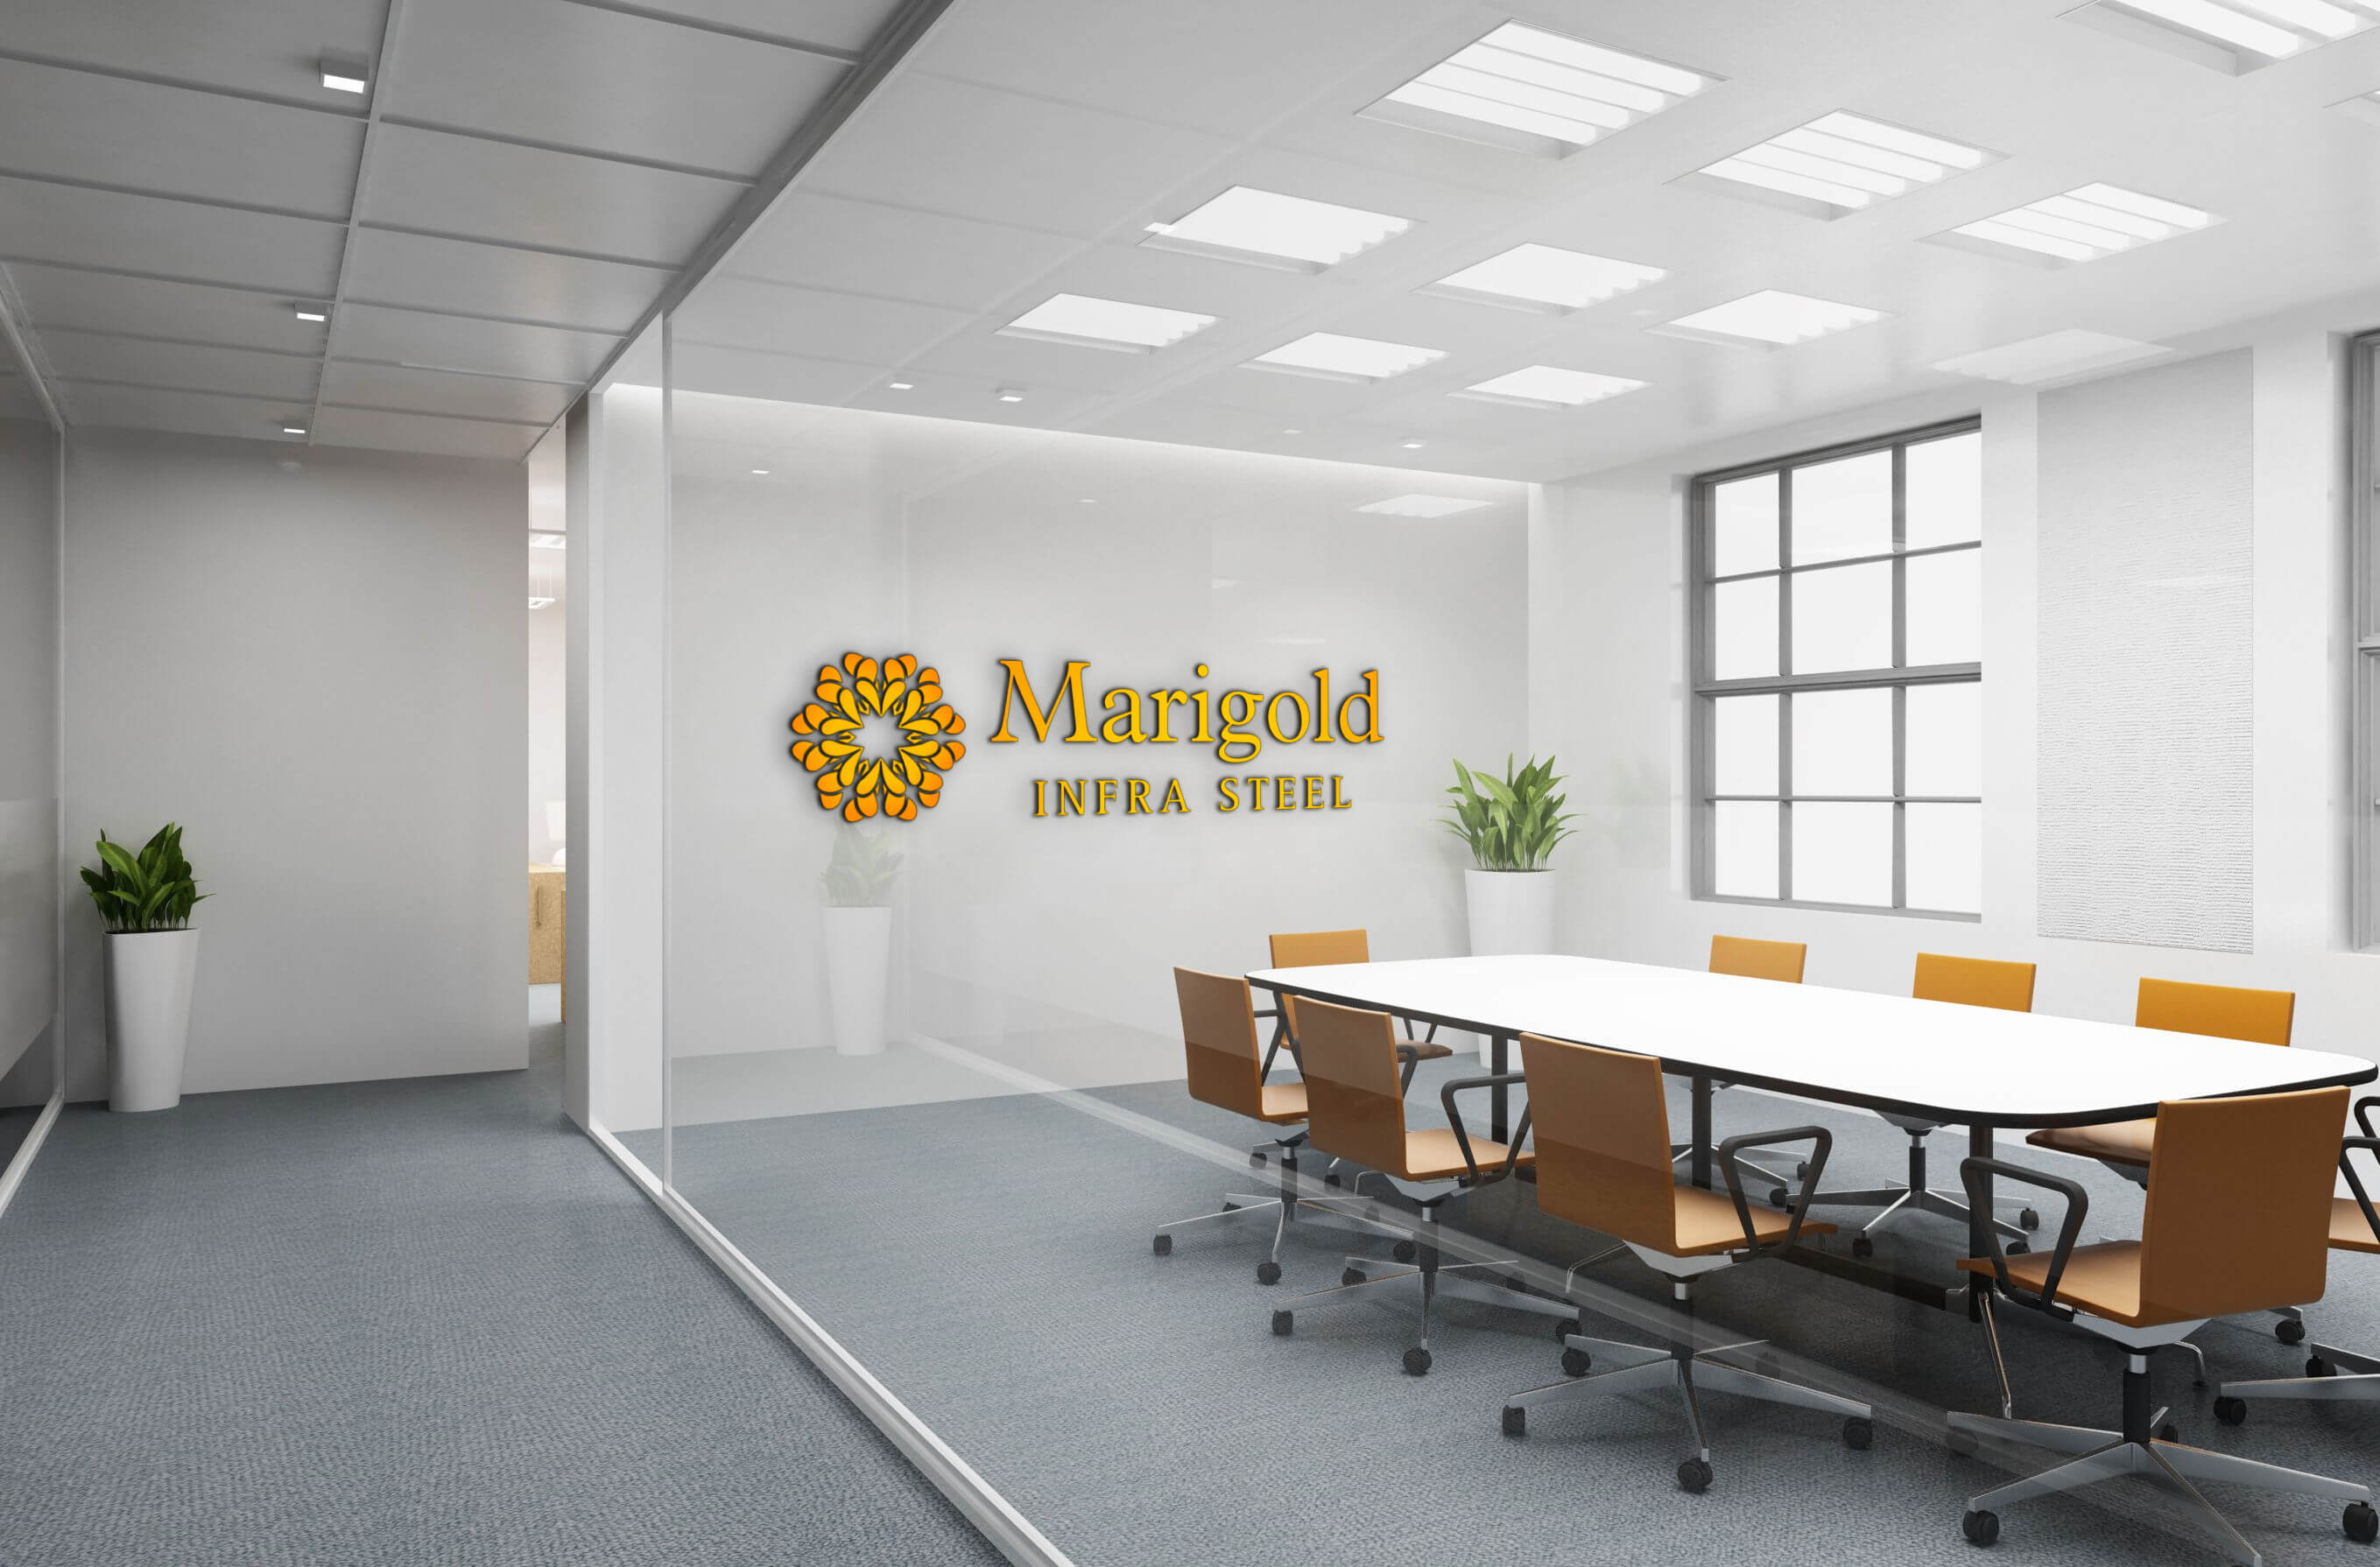 About Marigold Infra Steel